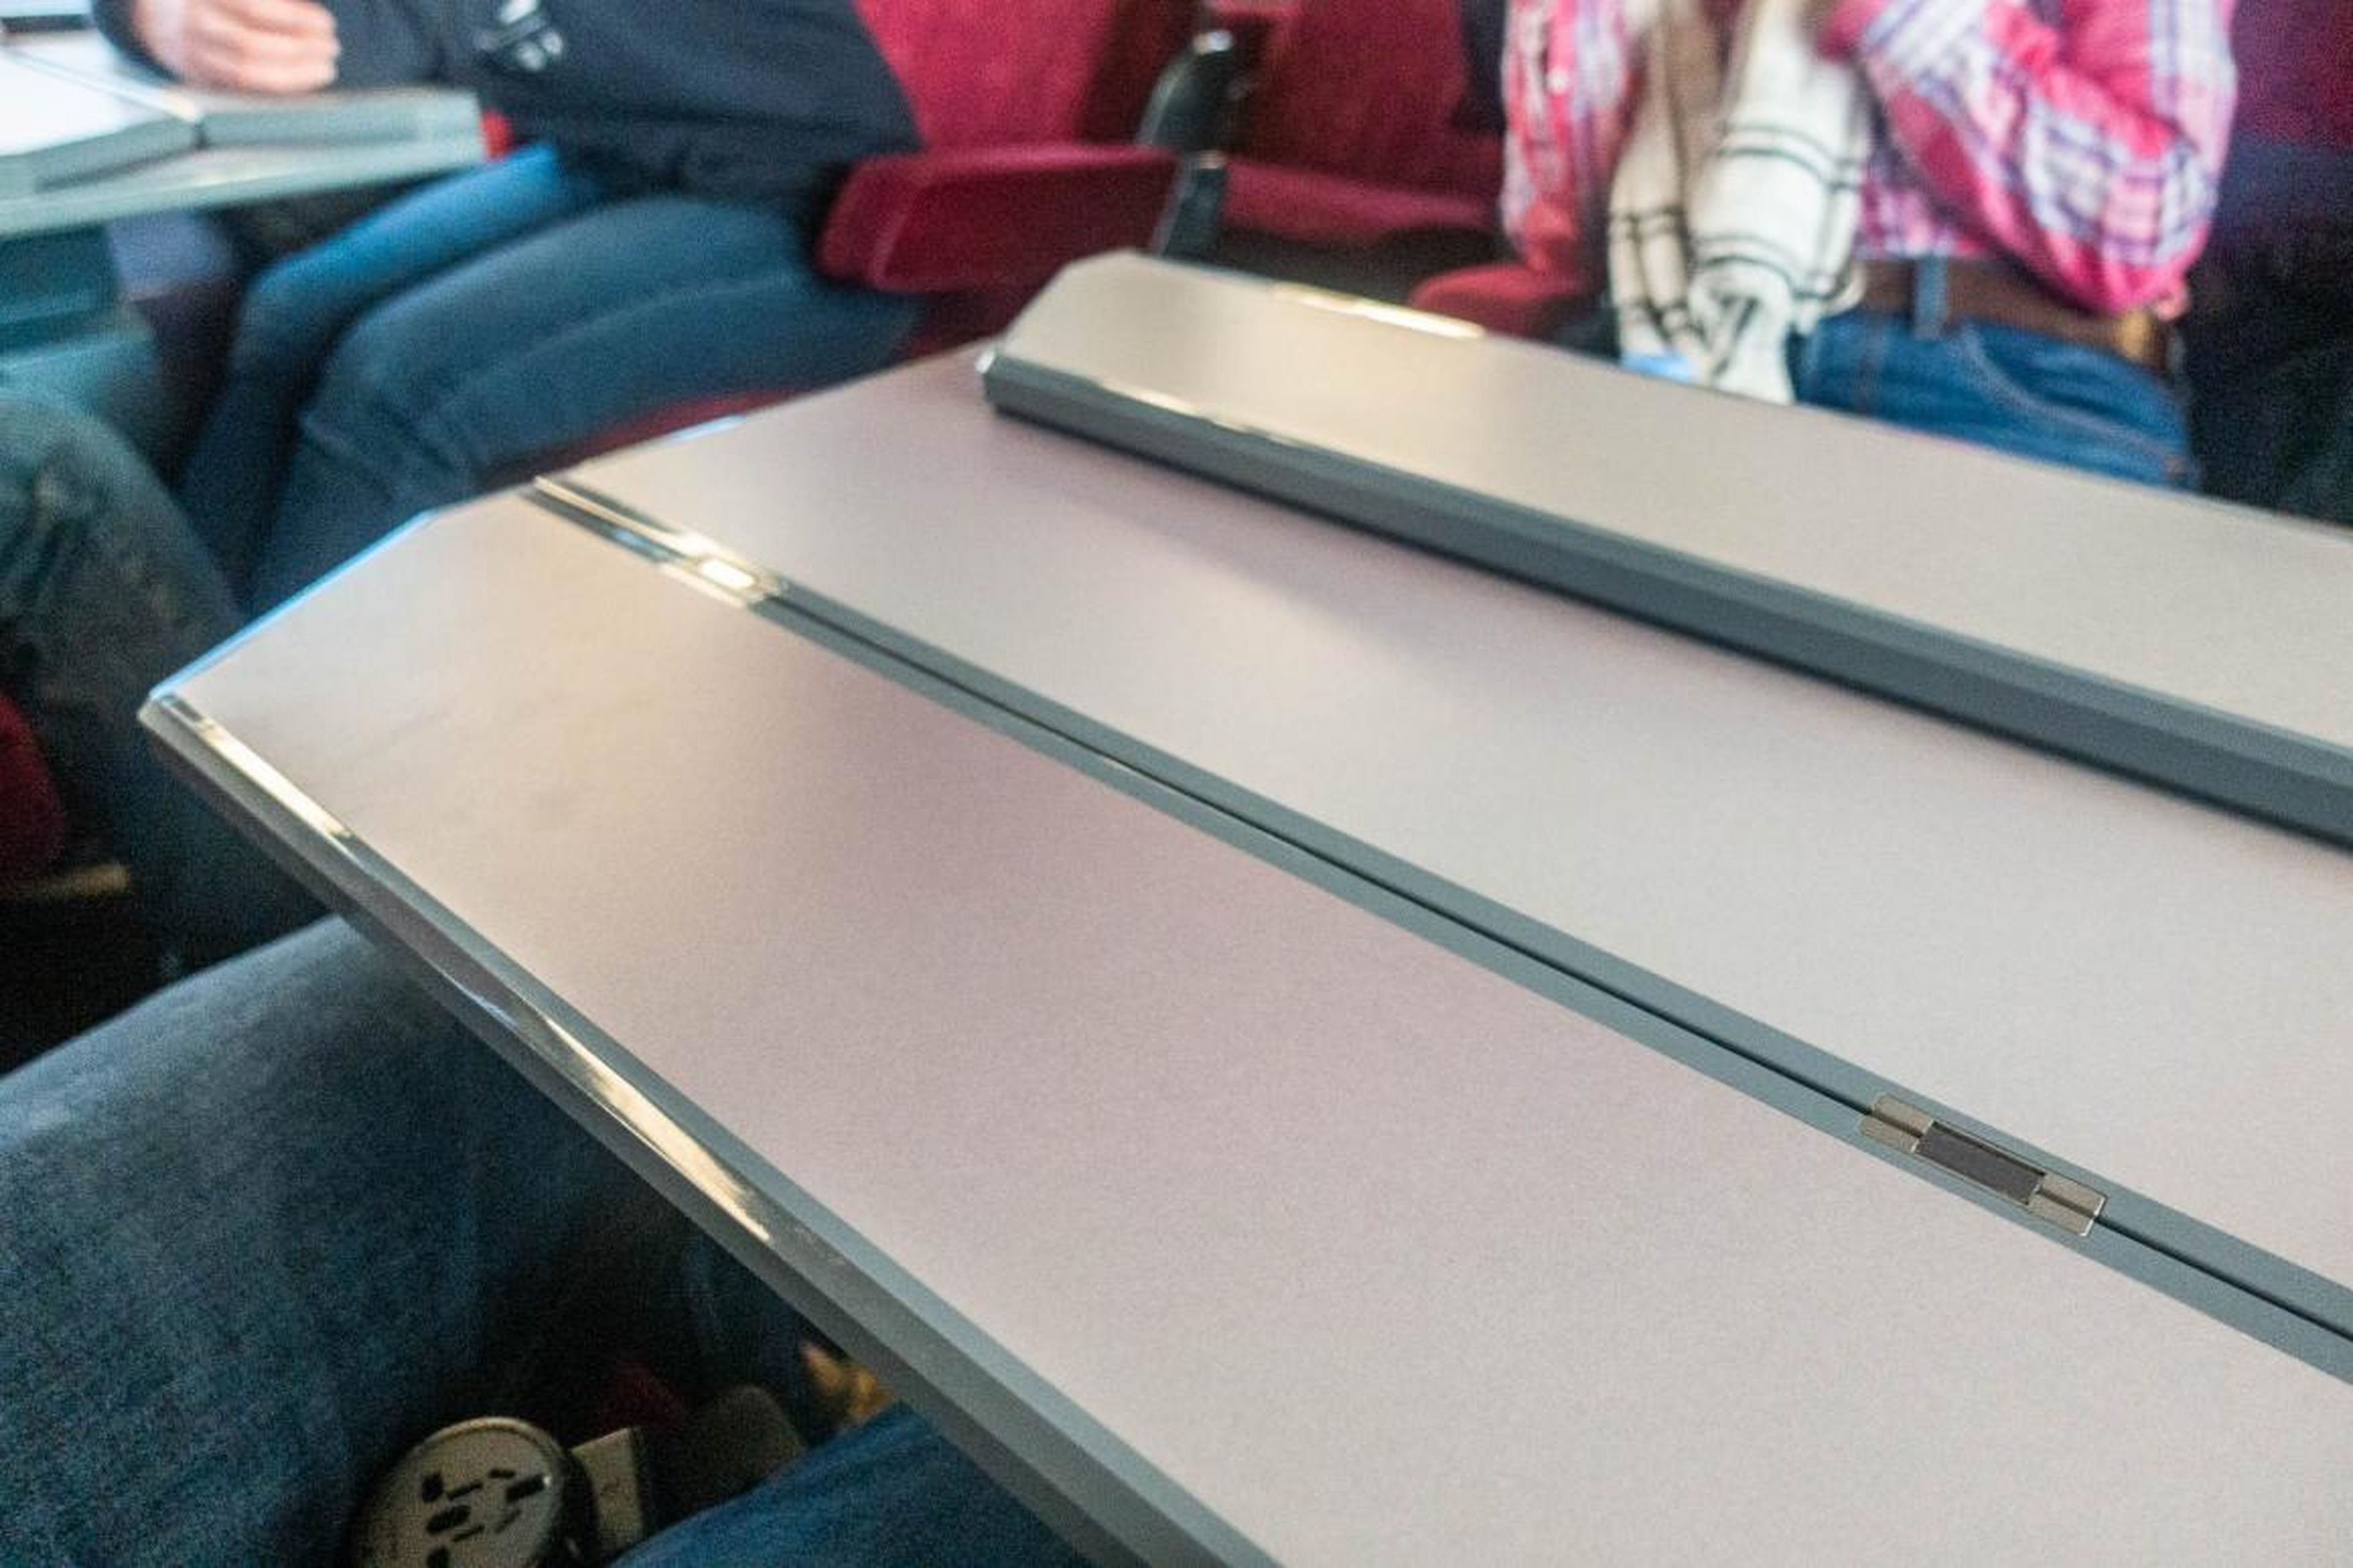 The tray table on the double rows folds out for each person. It's a much roomier table than you'd typically get on an airplane.